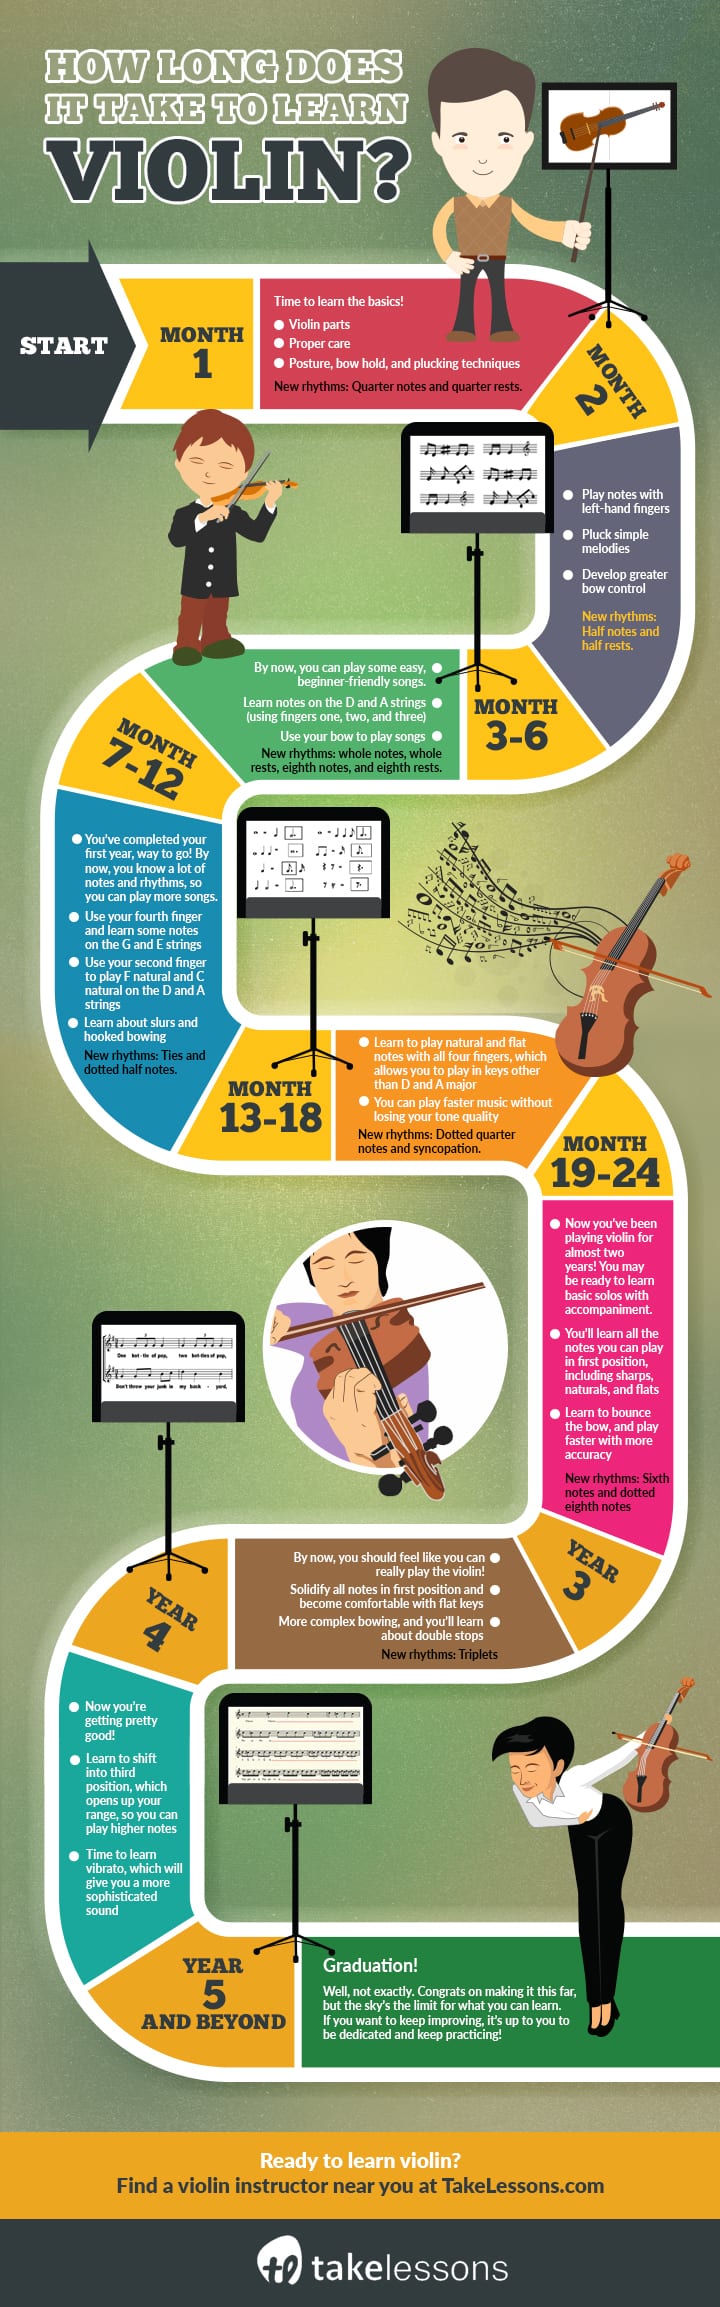 how-long-does-it-take-to-learn-violin